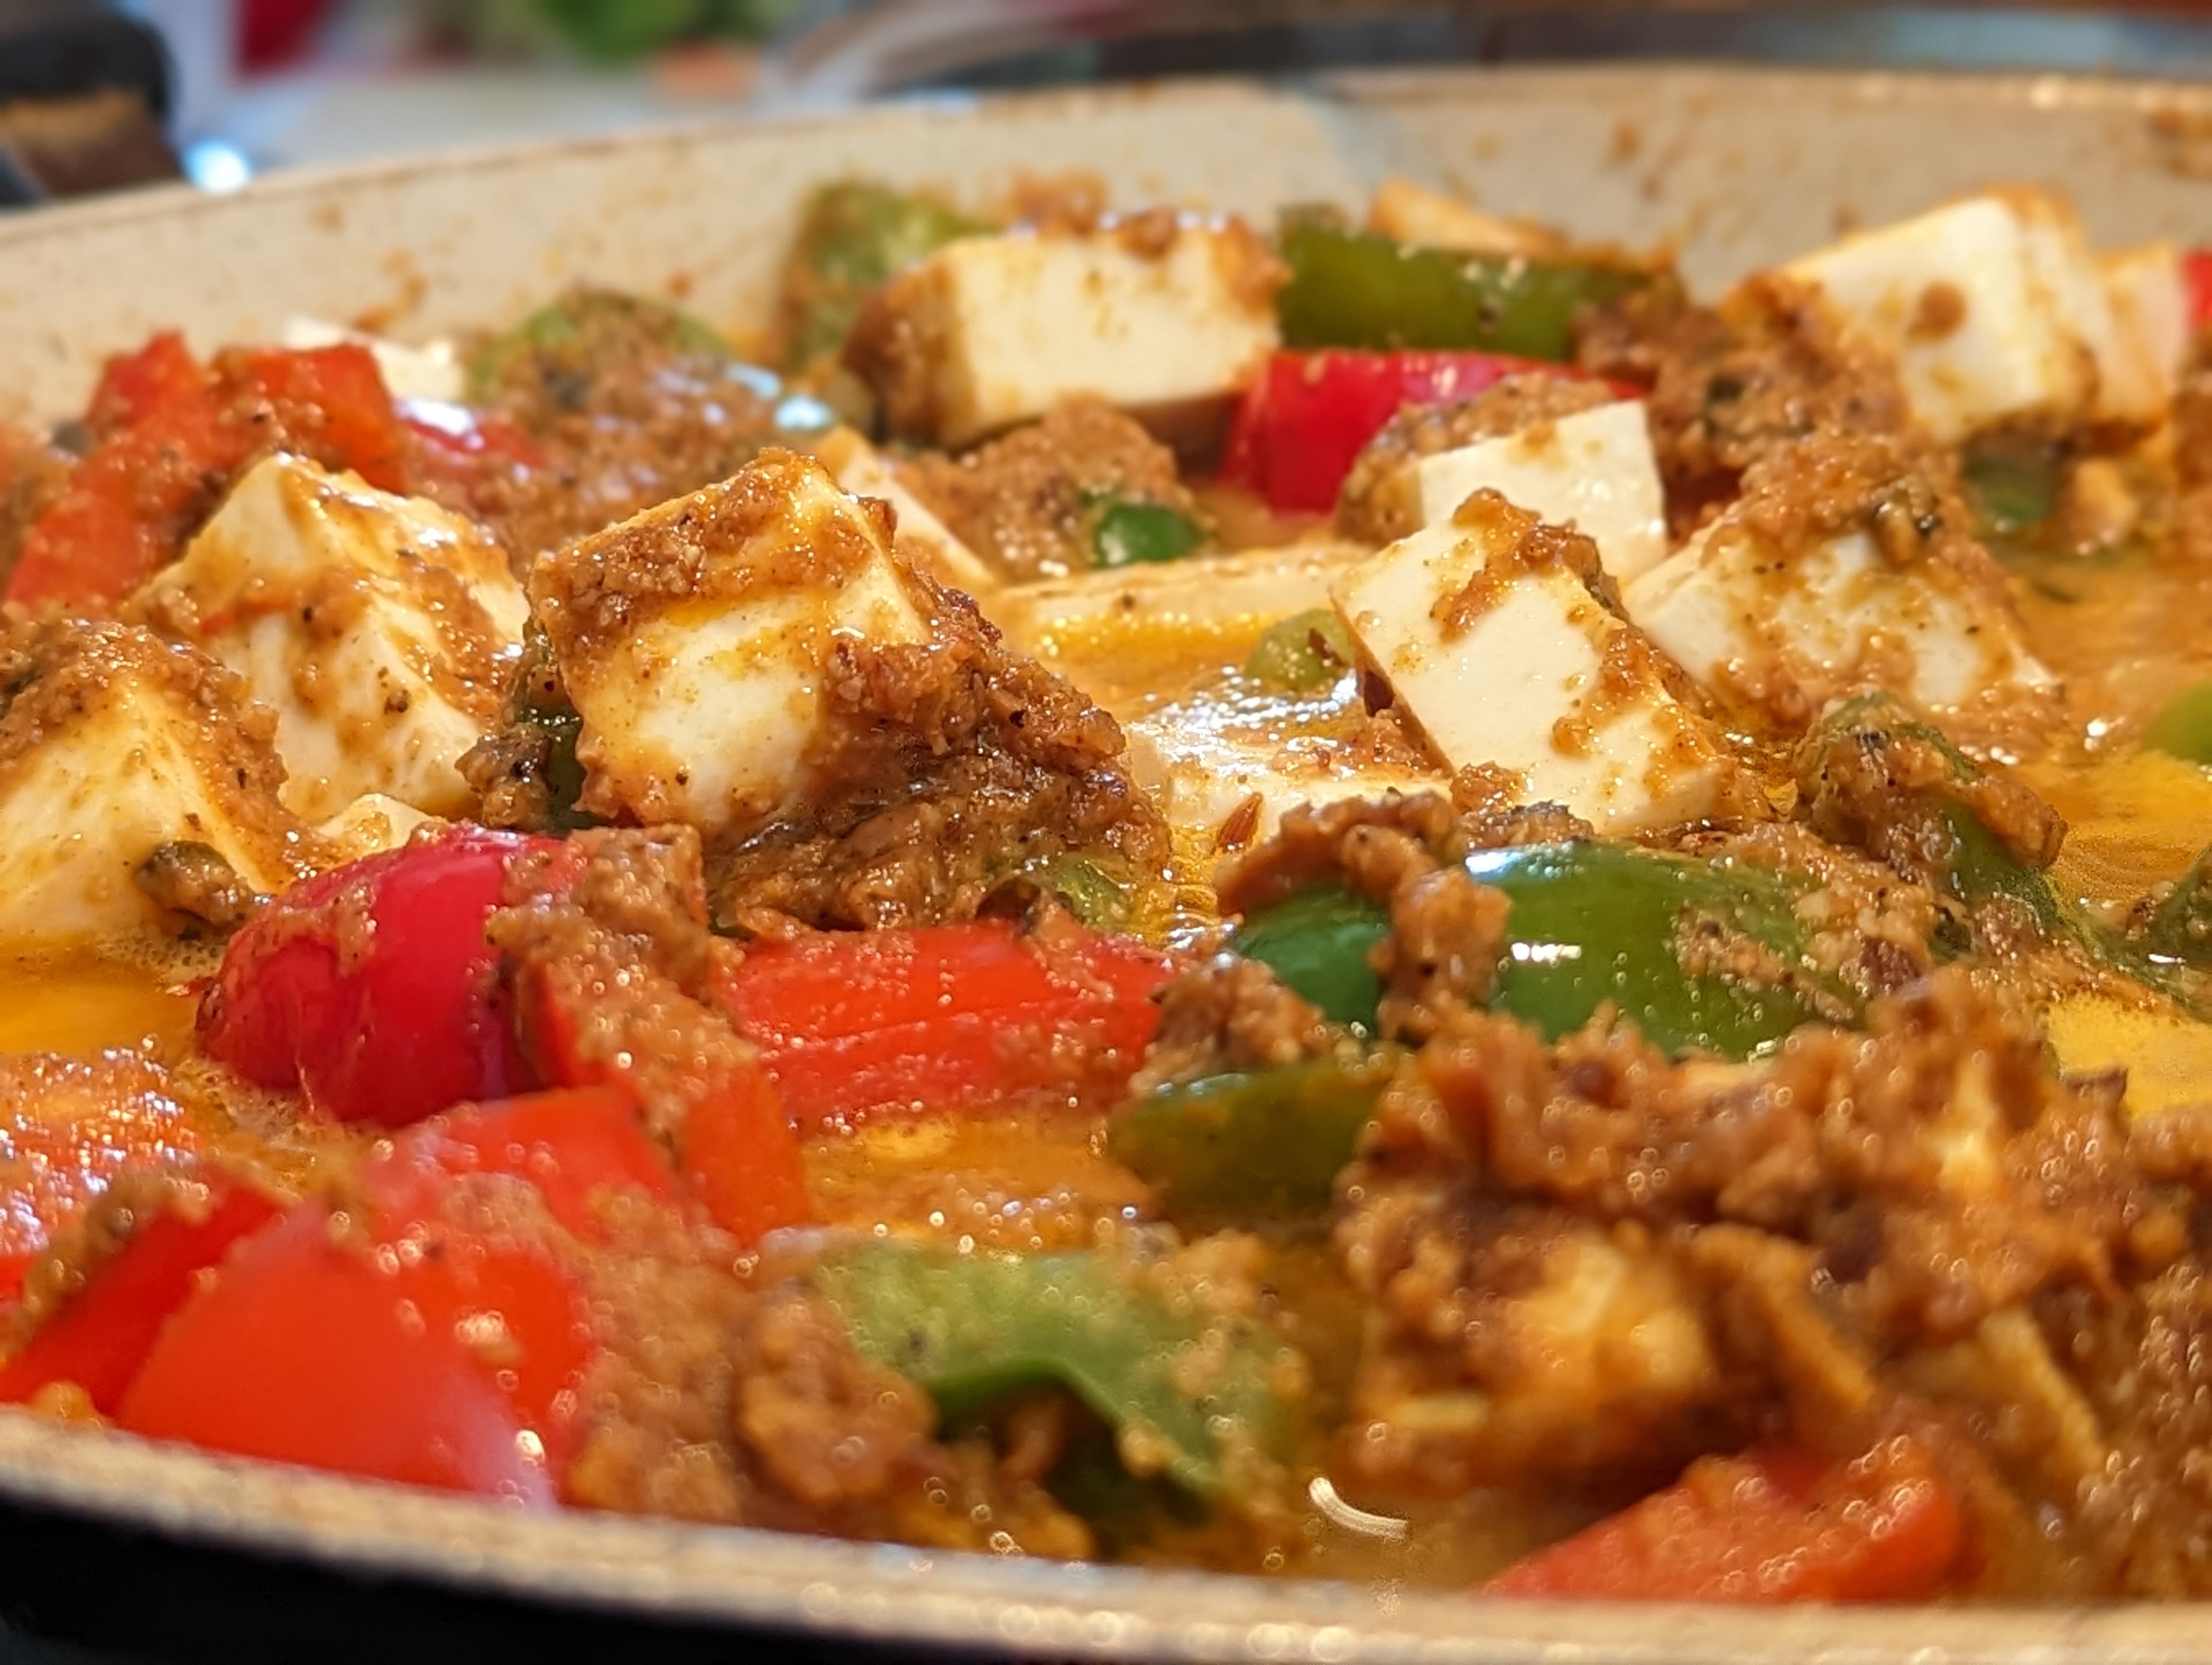 paneer, cheese, indian cheese, indian food, warm, savory, bell peppers, curry, spices, delicious savory meals, dinner